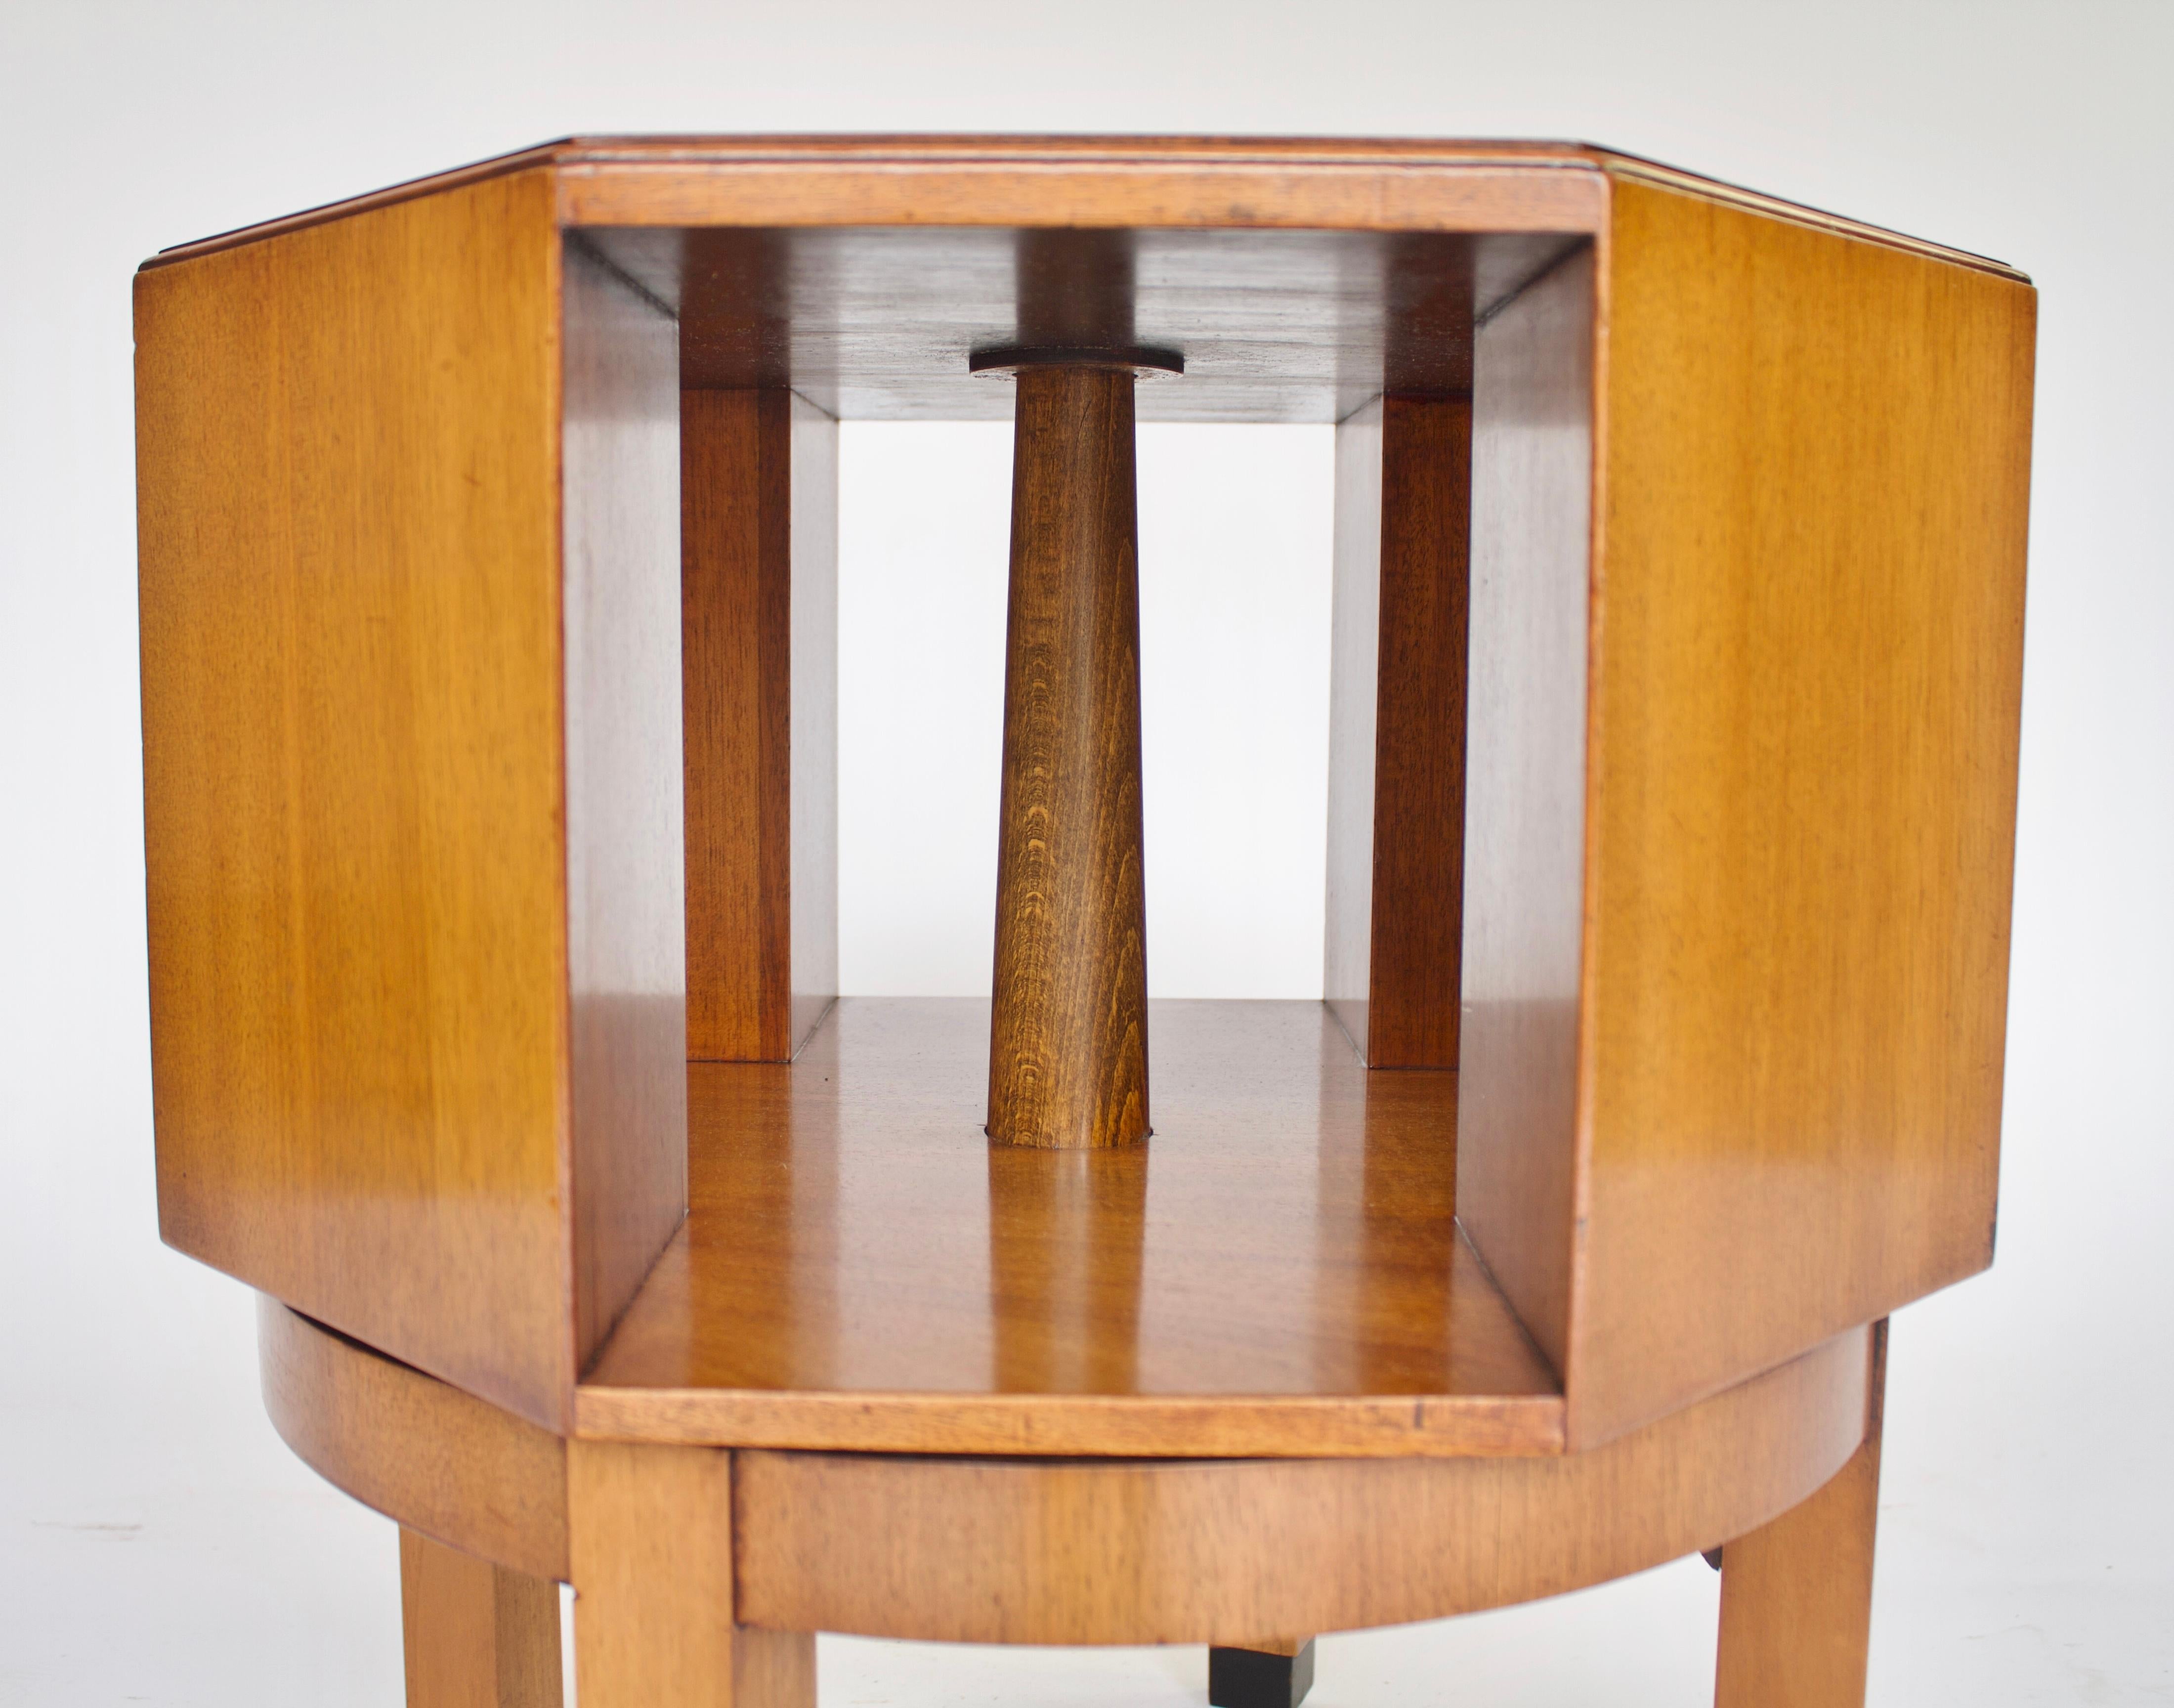 Art Deco Walnut Revolving Book Table circa 1920s
Octagonal in shape
Walnut Quarter veneer on top, 
4 open compartments to hold books, 
Revolving Action
Circular base with 4 Square shaped legs.
Inset black feet
Good Quality Table
Recently Polished